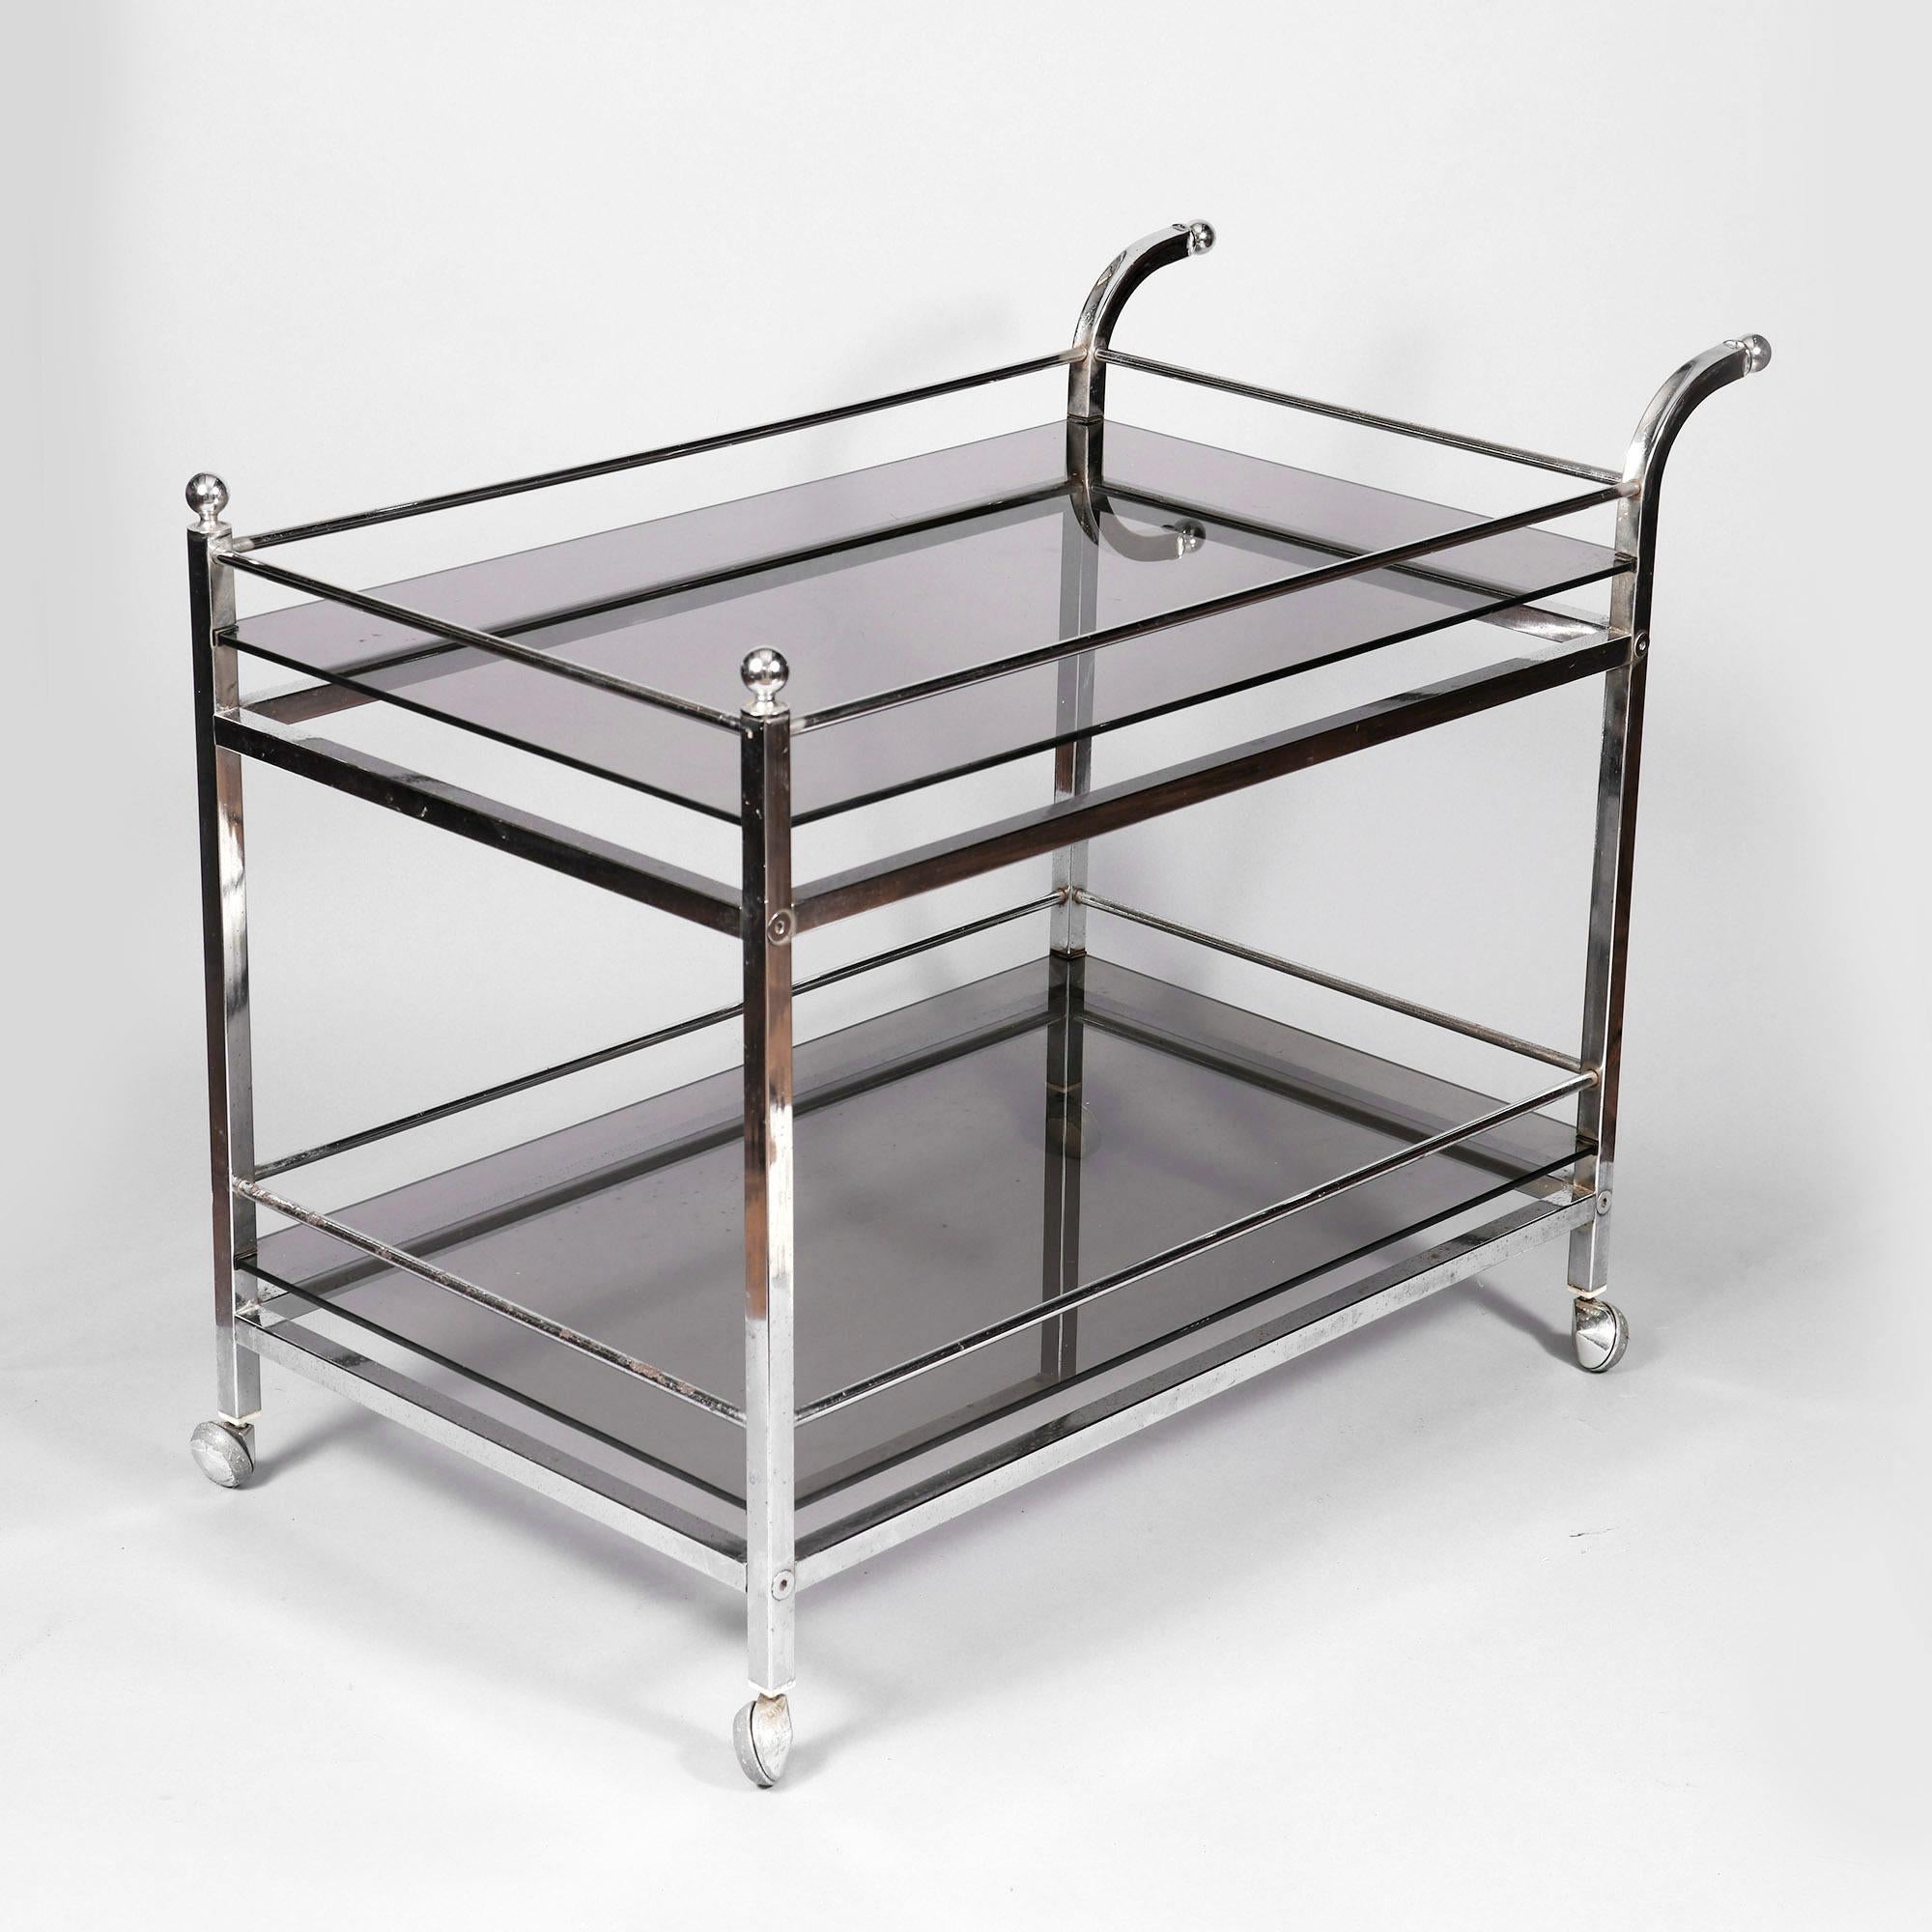 A chrome drinks trolley with smoked glass tops fashioned from square tubed legs and cross bars fixed with flush circular bolts. The trolley with ball finals to the front legs and fitted to the ends of curved tube handles. The whole is on four